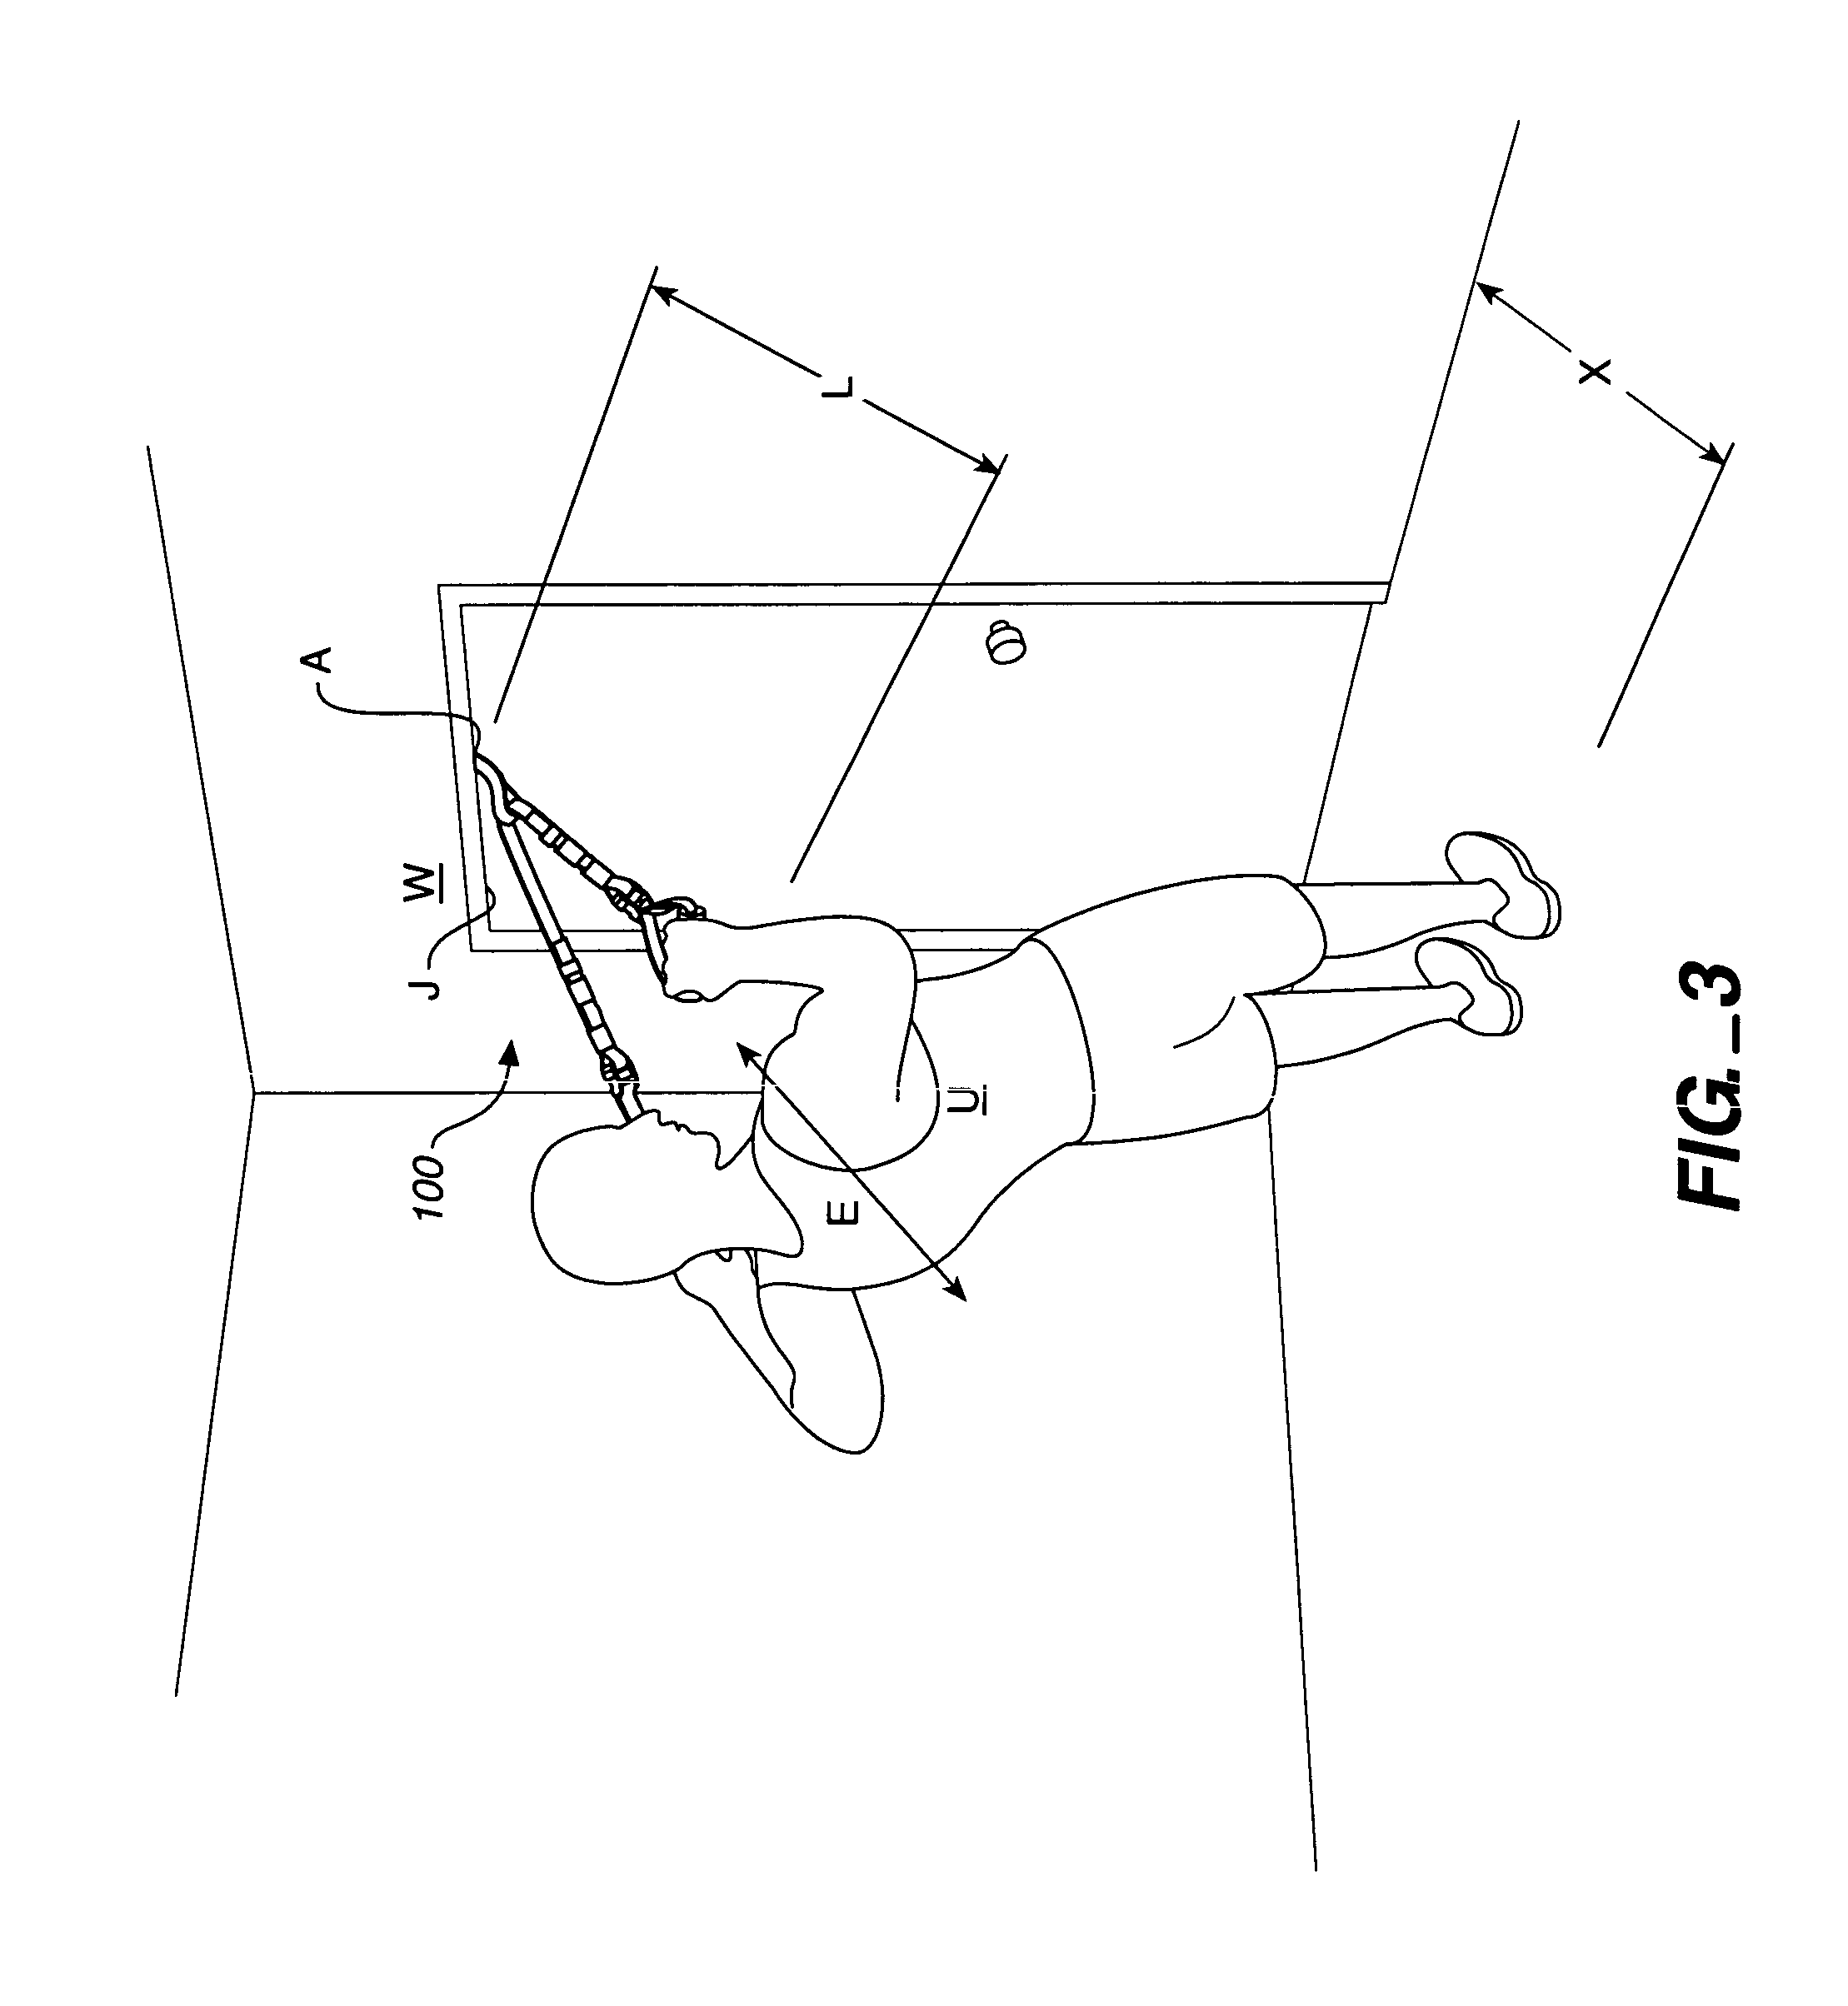 Exercise device including adjustable, inelastic straps